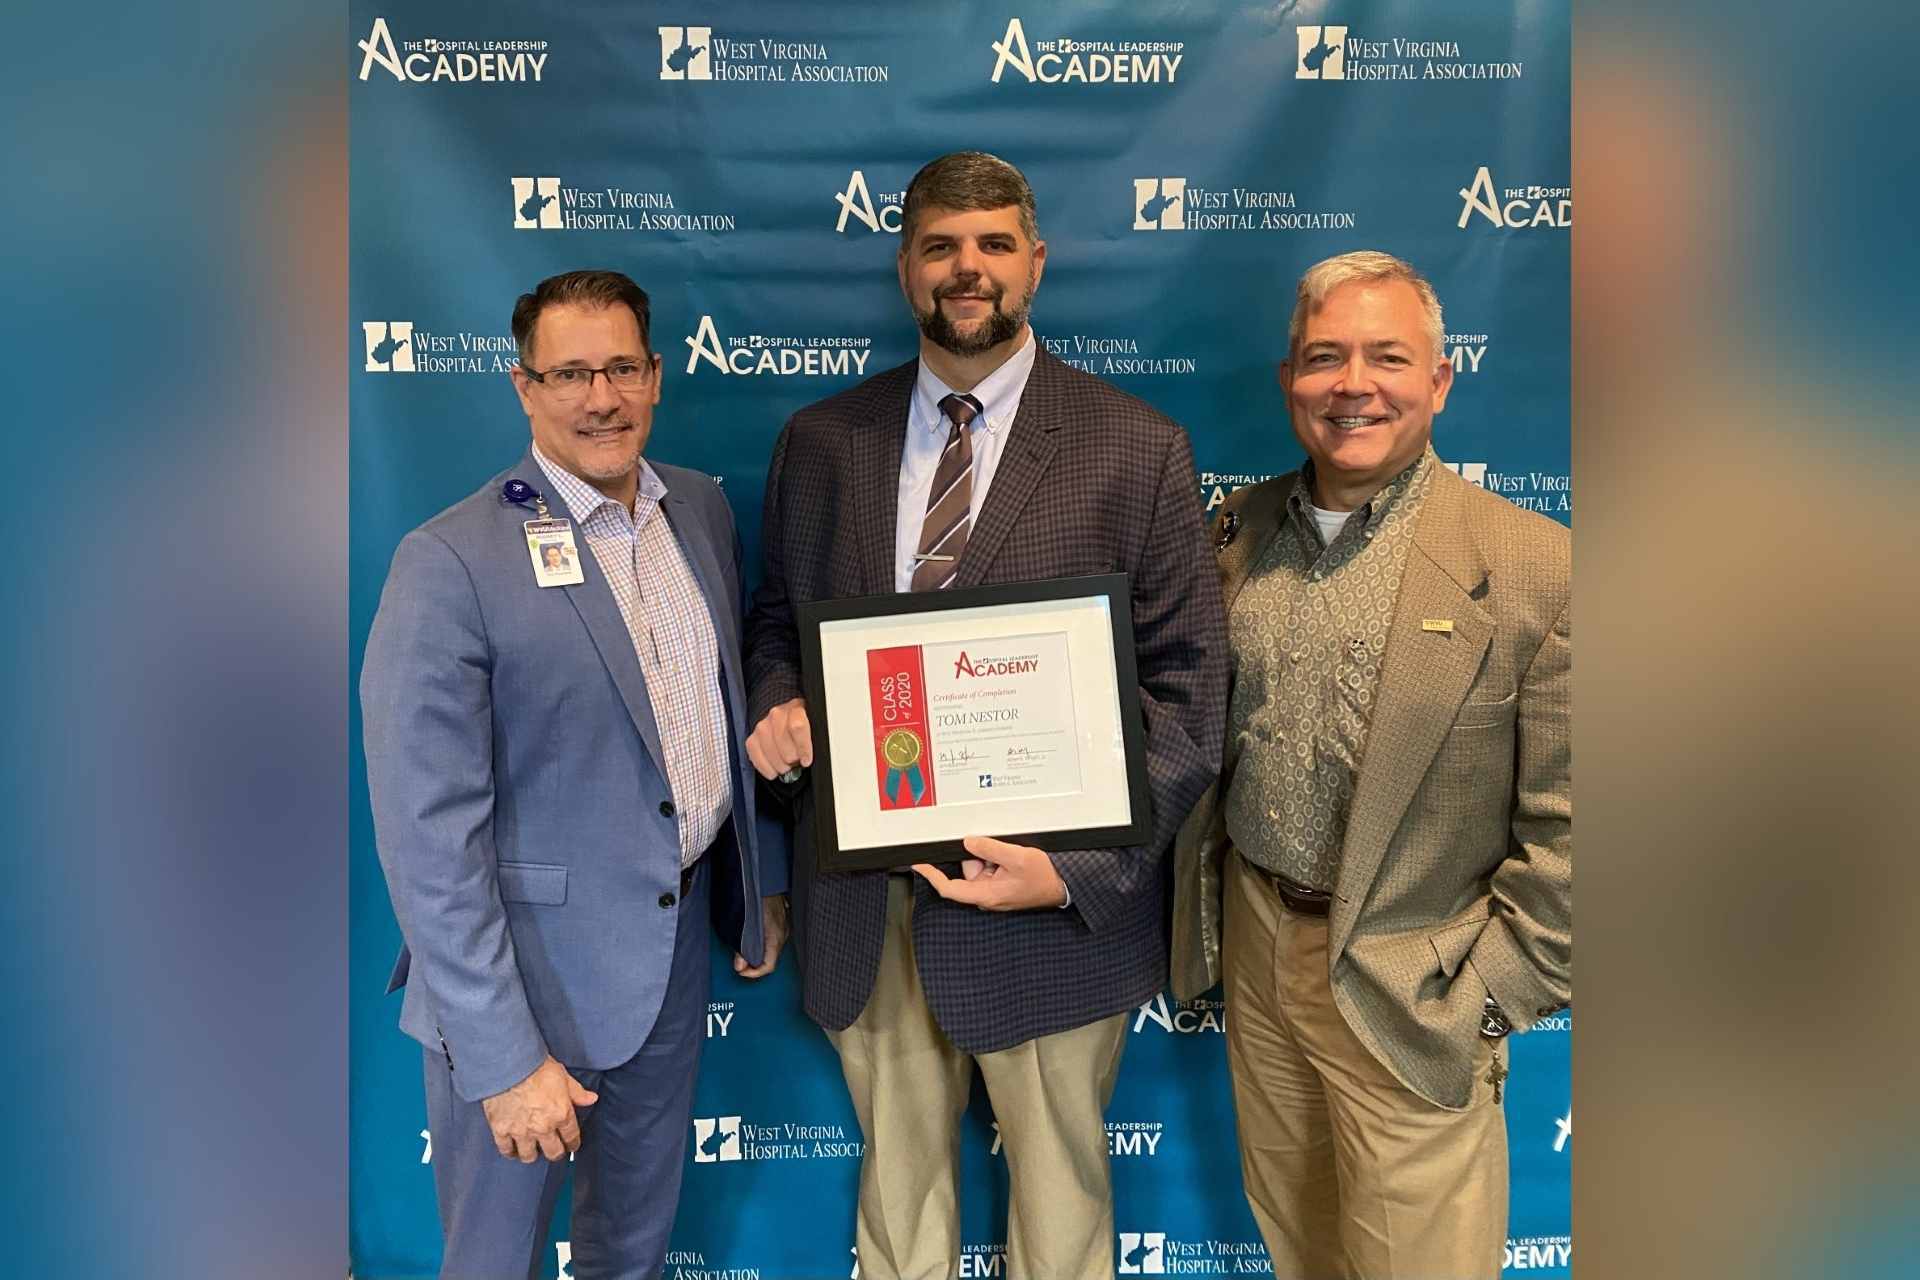 From left to right: Rodney Baker, Vice President of Ancillary Services and Physician Practice Administrator; Tom Nestor, Director of Diagnostic Imaging Service; and Skip Gjolberg, President of St. Joseph’s Hospital.